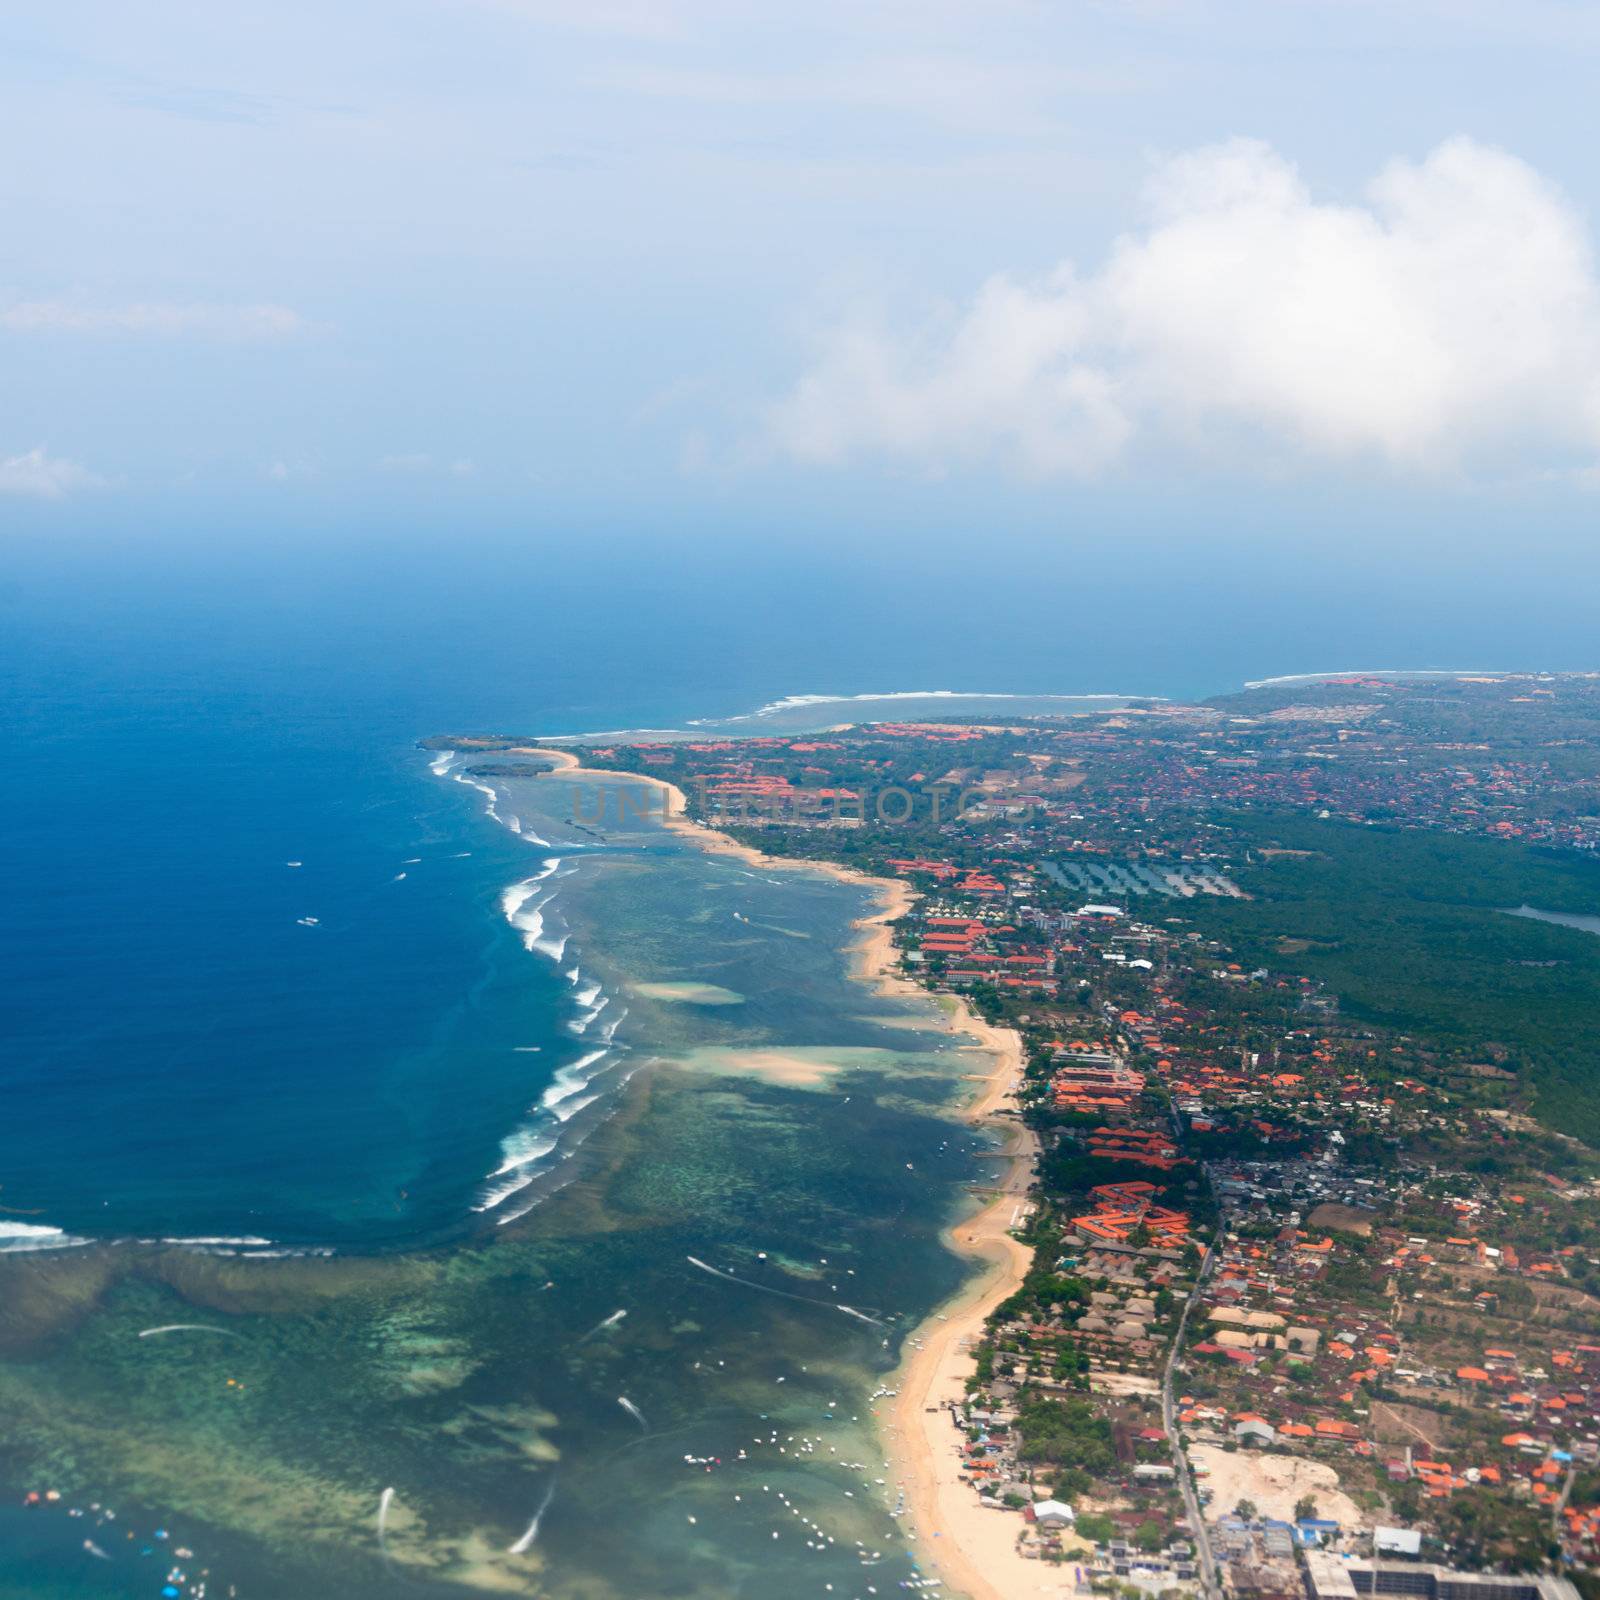 Aerial view of Nusa Dua beach on Bali showing roofs of many hotels and restaurants